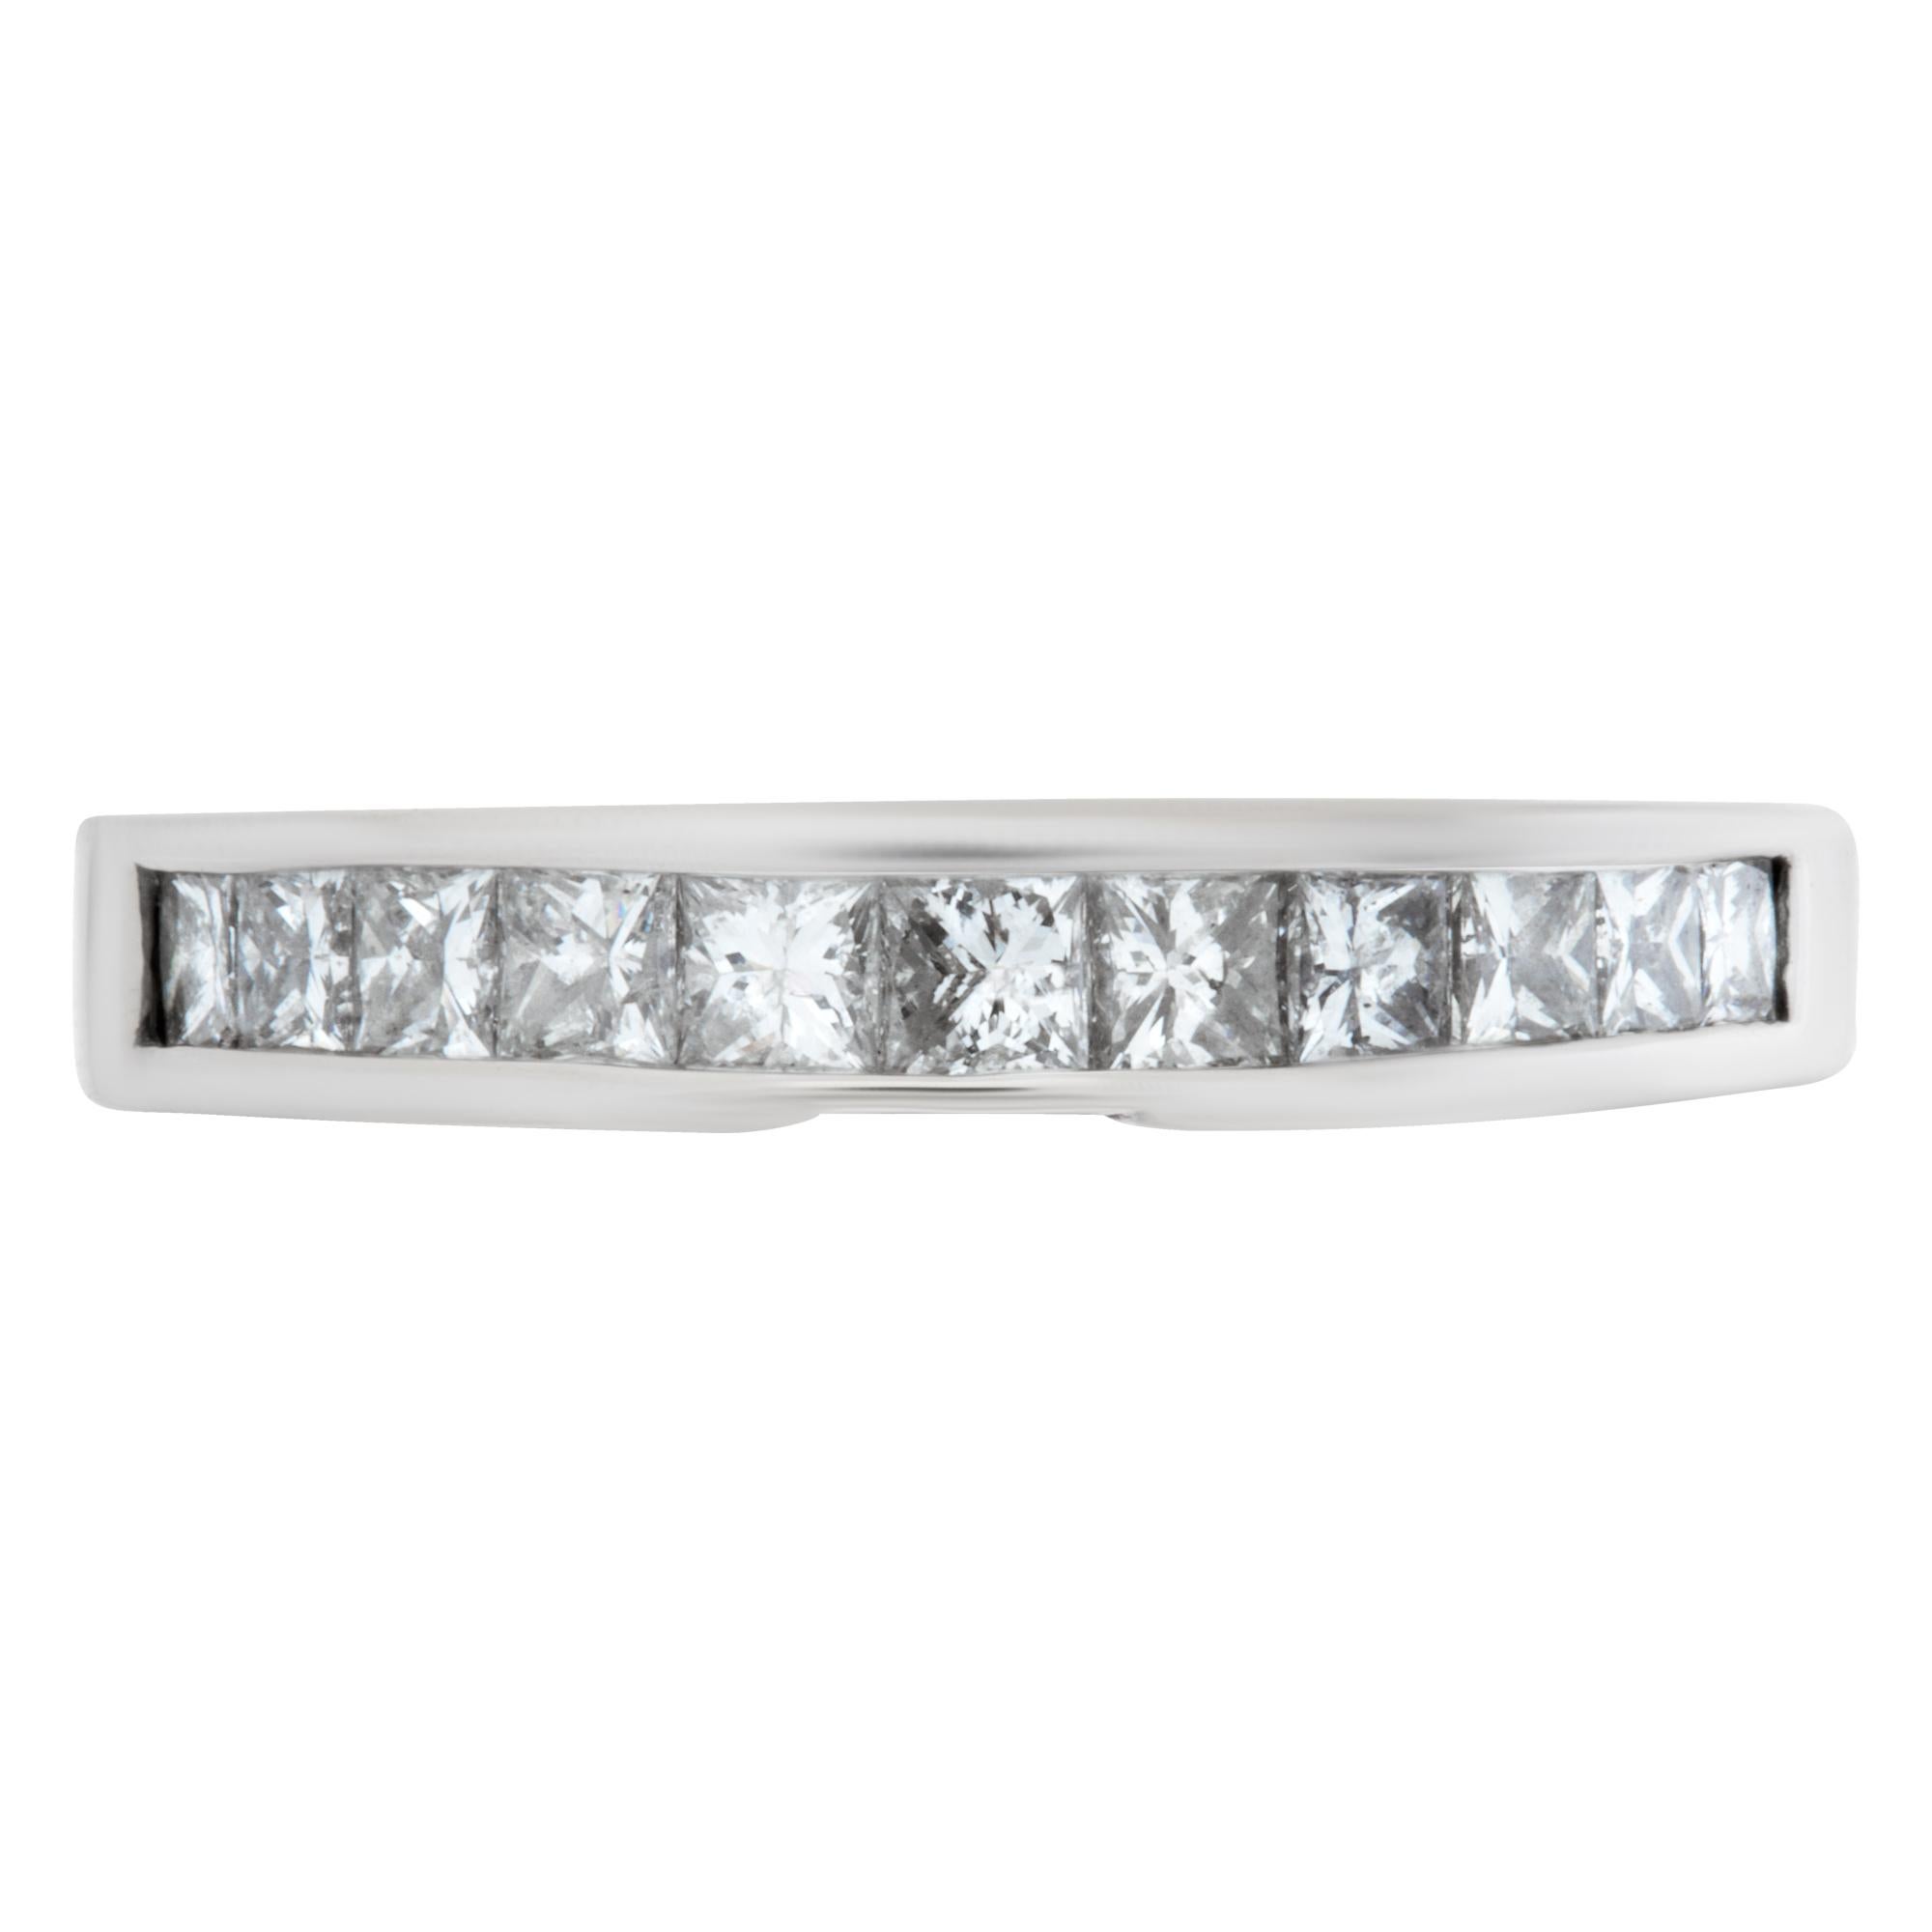 Diamond Semi Eternity Band and Ring in elegant 14k white gold with app. 1 carat in princess cut diamonds. Size 8.This Diamond ring is currently size 8 and some items can be sized up or down, please ask! It weighs 2.3 pennyweights and is 14k White